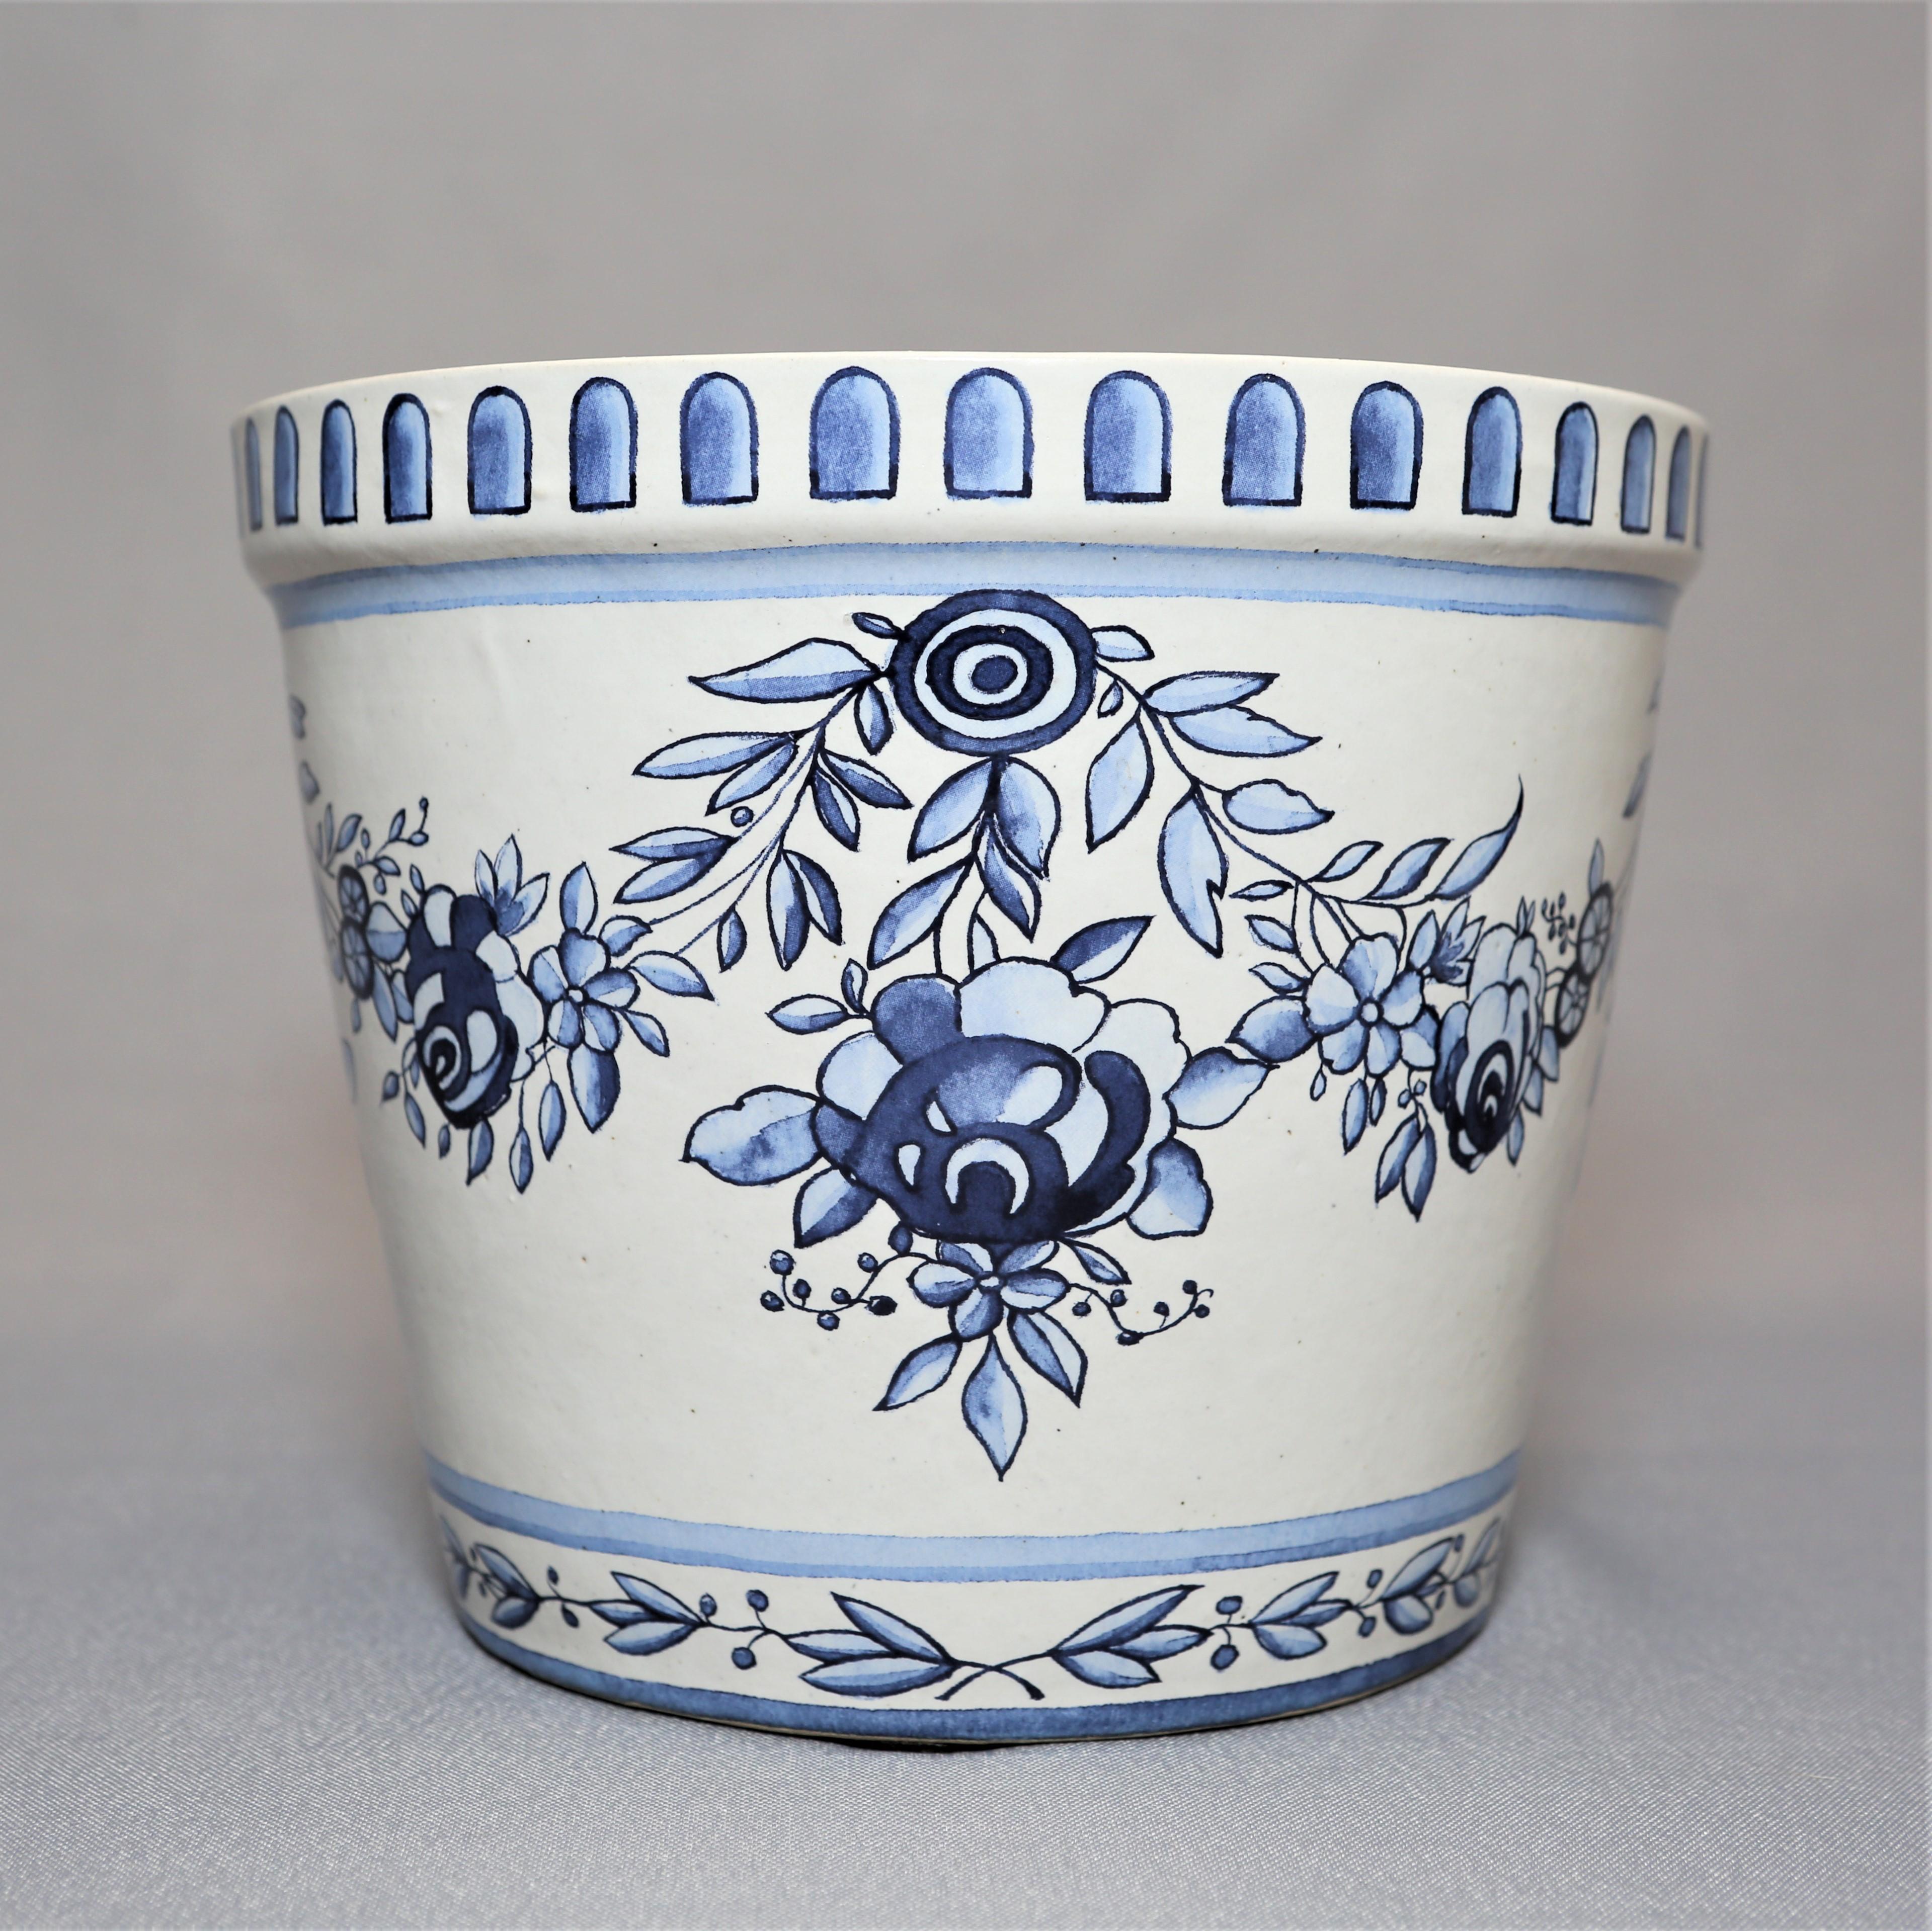 Handmade reproduction of the original 18th century Marie-Antoinette flower pots with saucers in blue and white enameled, Frost proof stoneware. Originally created for the Versailles castle gardens. Packed in a box with the Queen's monogram and a